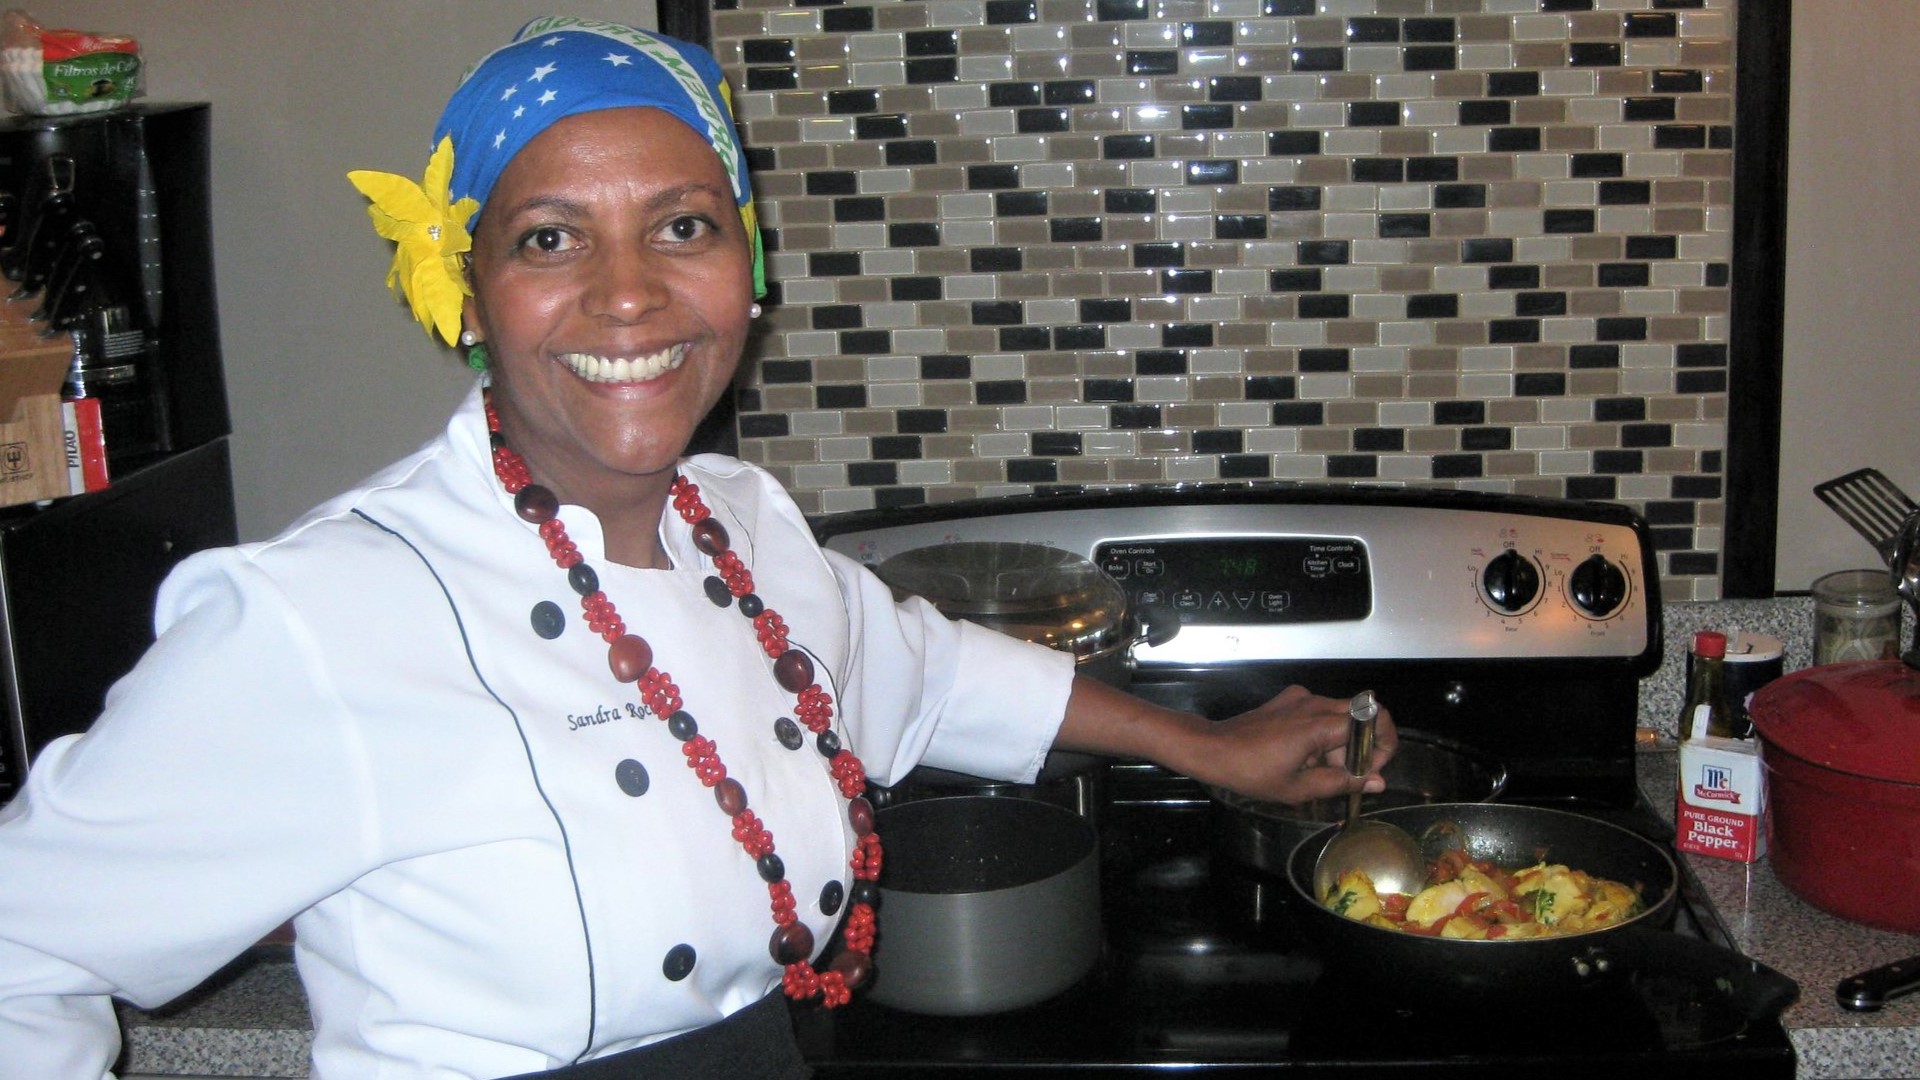 Sandra Rocha Evanoff started Brasil Comes To You to share her recipes and culture with W. WA